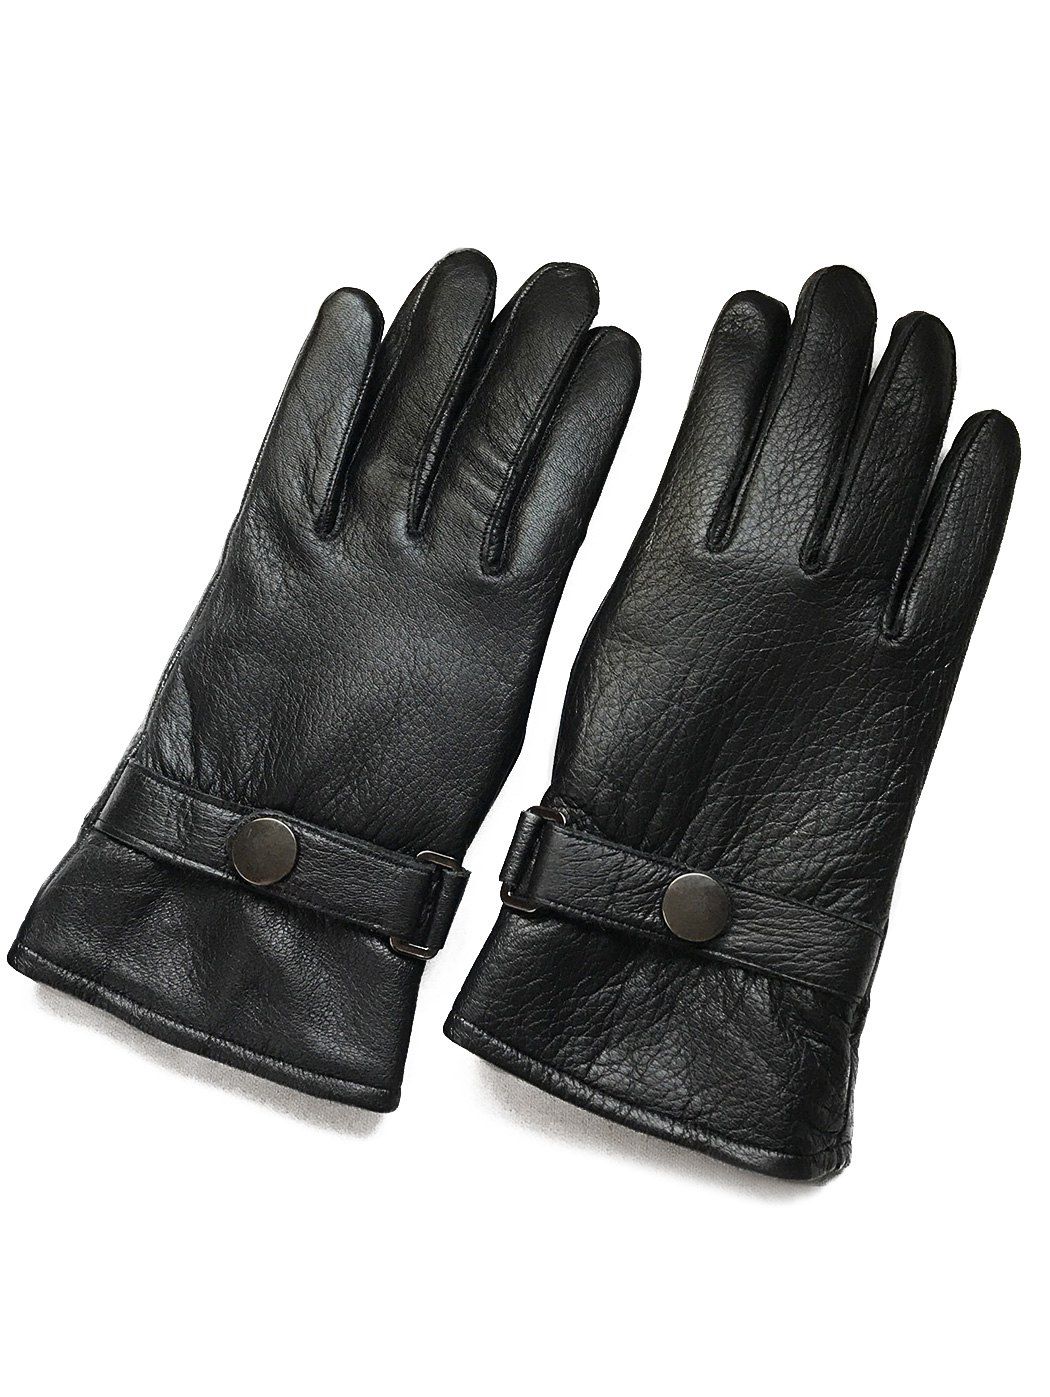 thick leather gloves